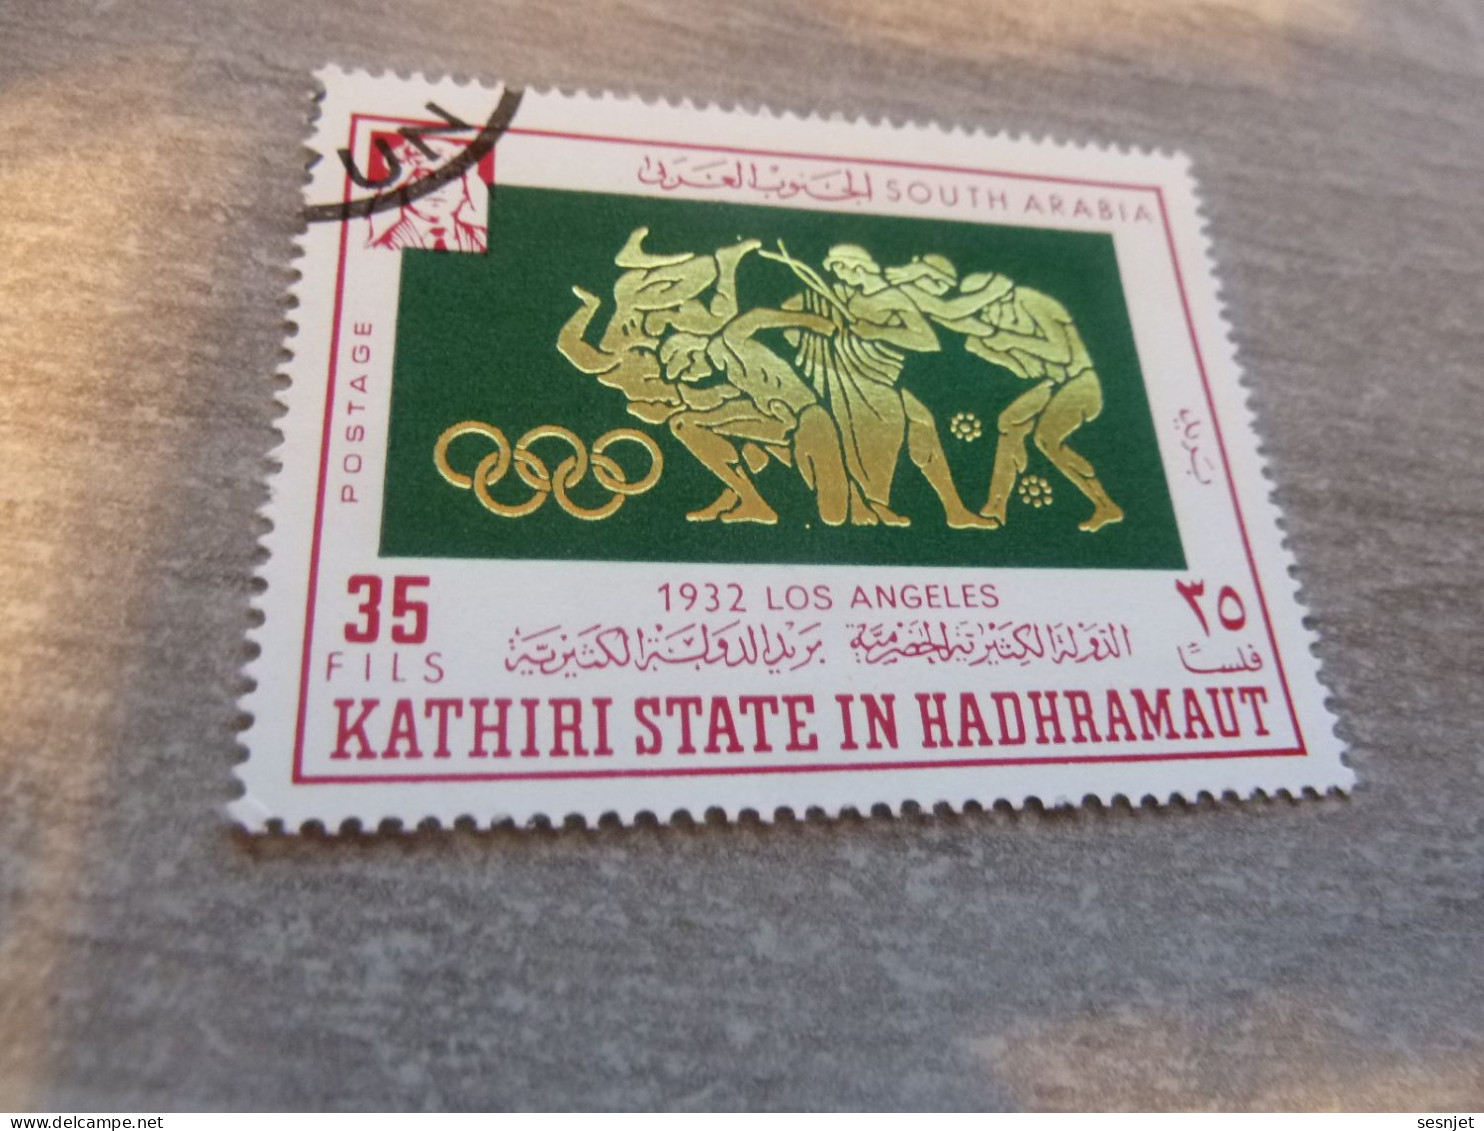 Kathiri State In Hadhramaut - 1932 - Los Angeles - Val 35 Fils - Postage - Multicolore - Oblitéré - - Zomer 1932: Los Angeles